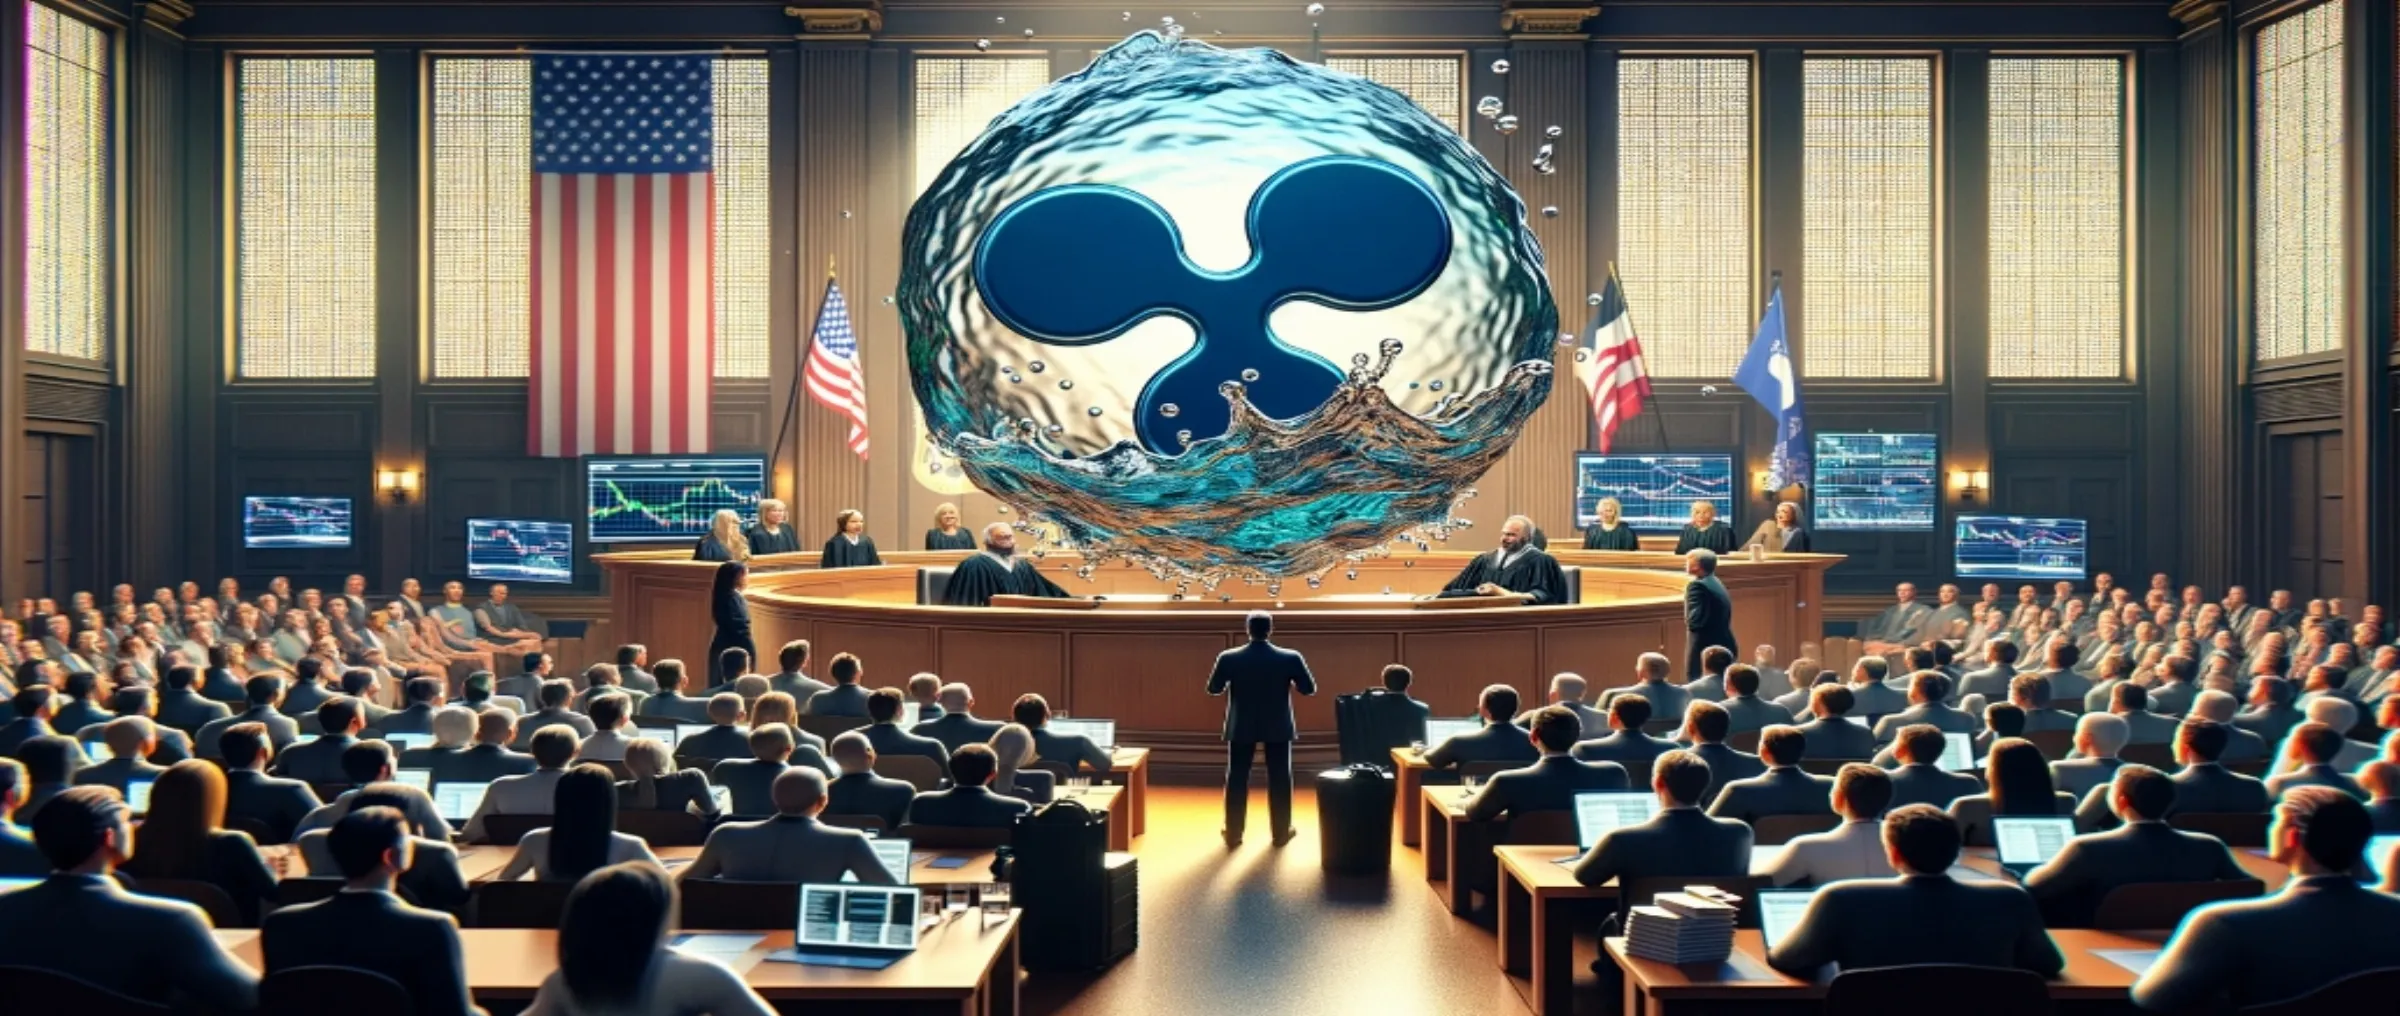 Ripple continues to fight in court with the SEC